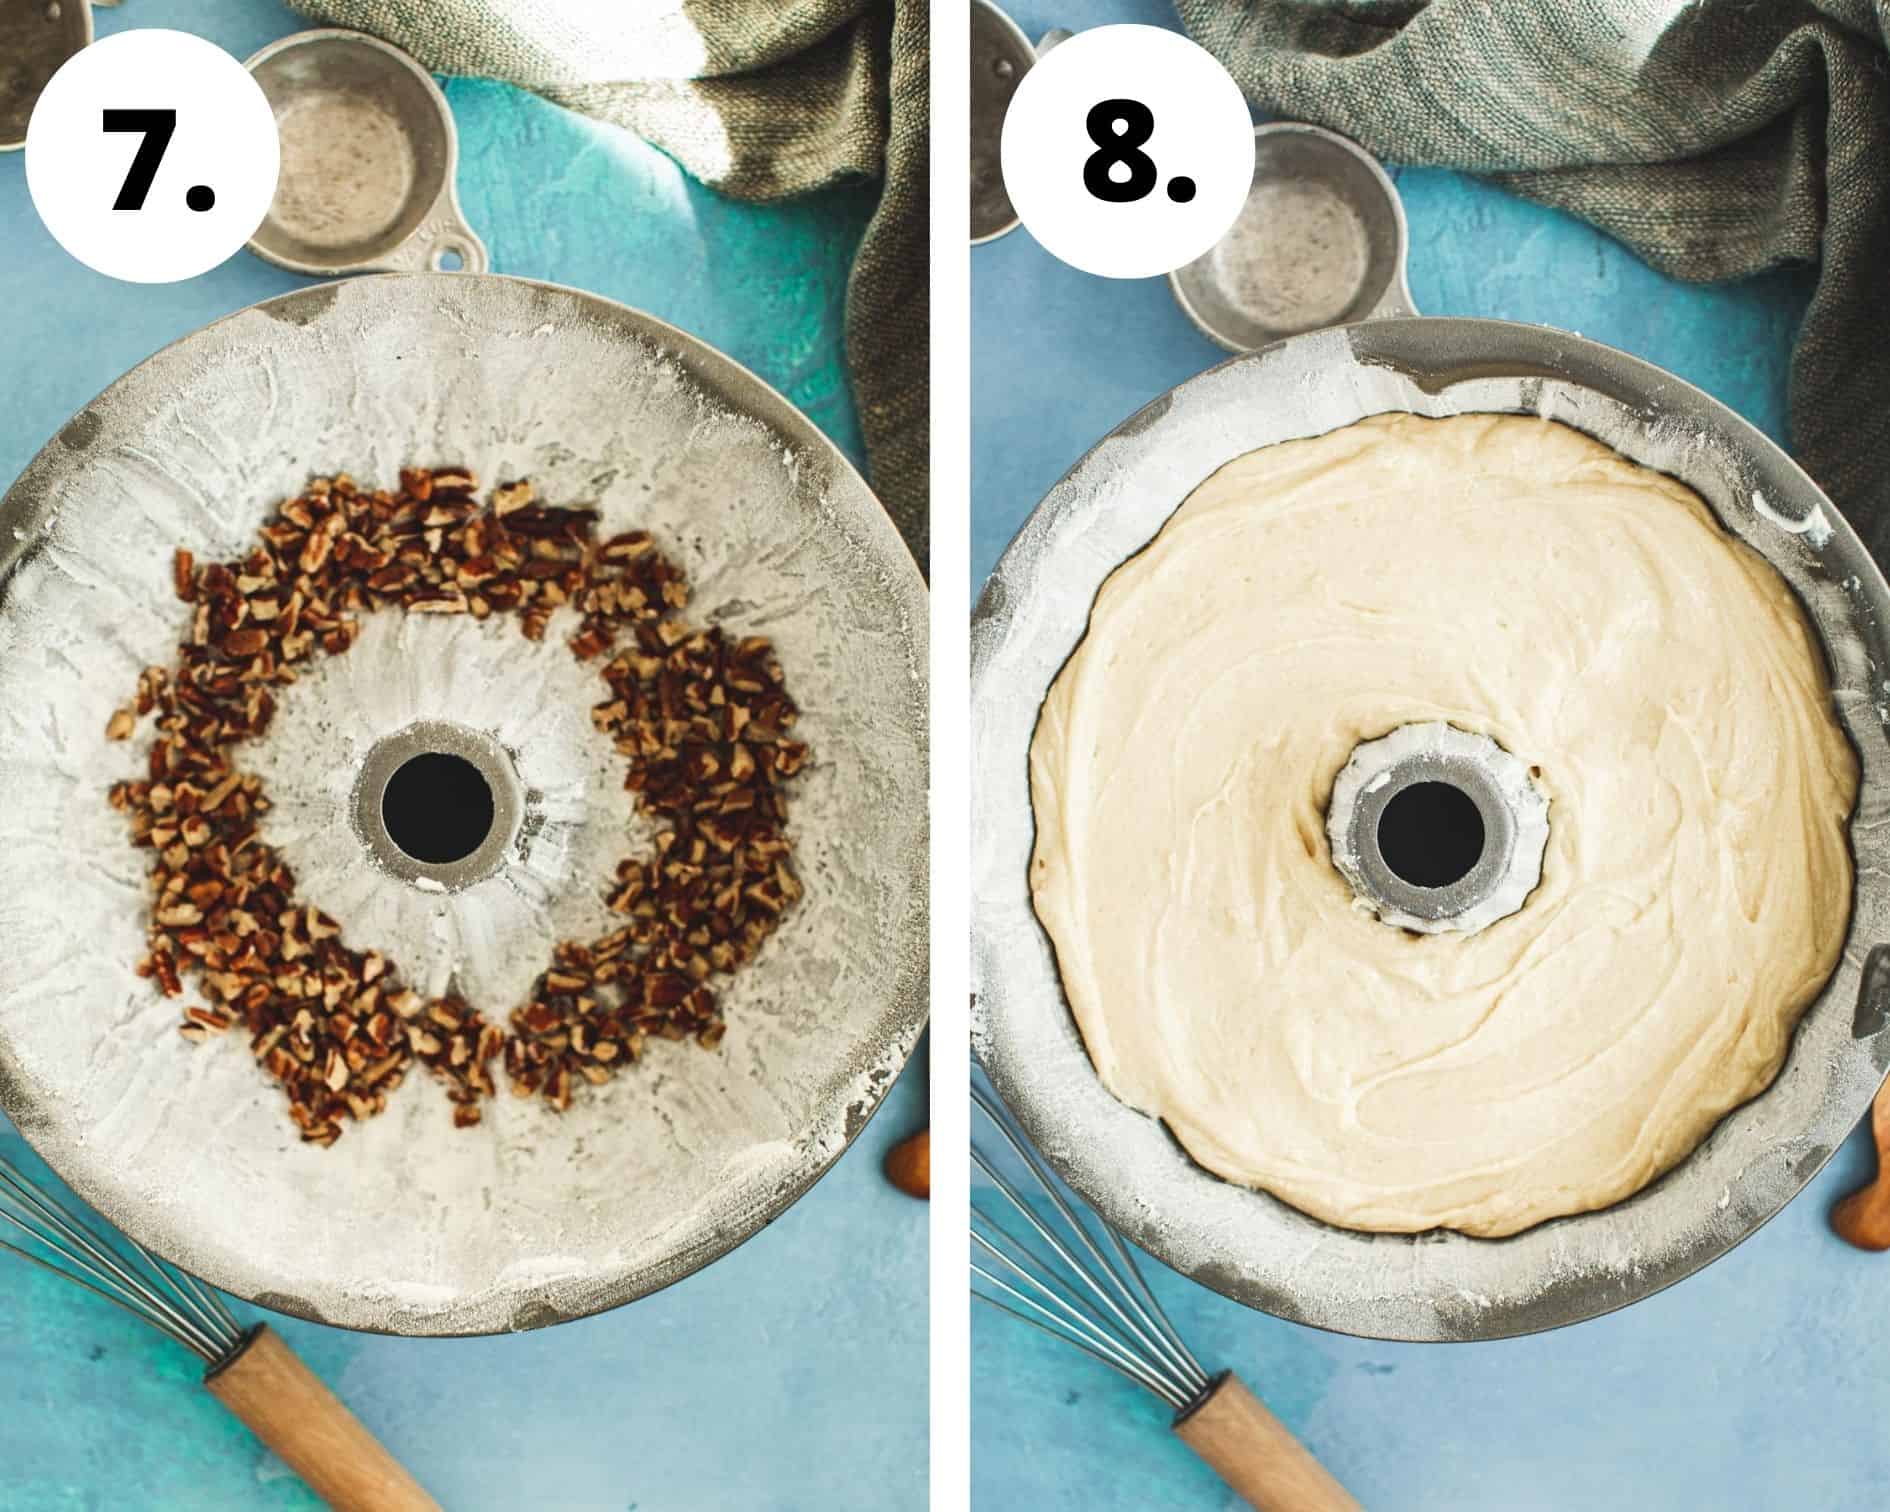 Jamaican rum cake process steps 7 and 8.